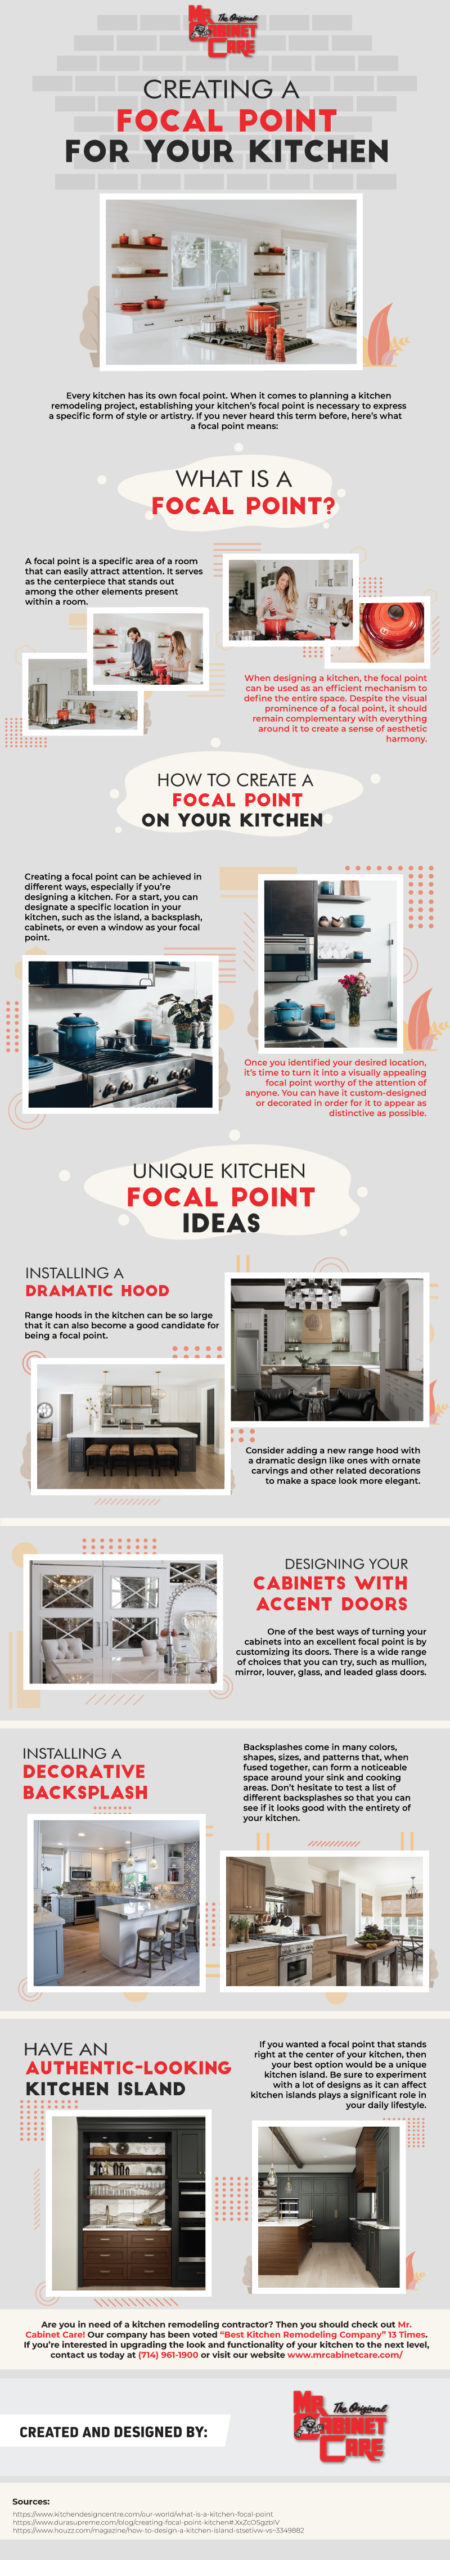 Creating a Focal Point for your Kitchen - Infographic